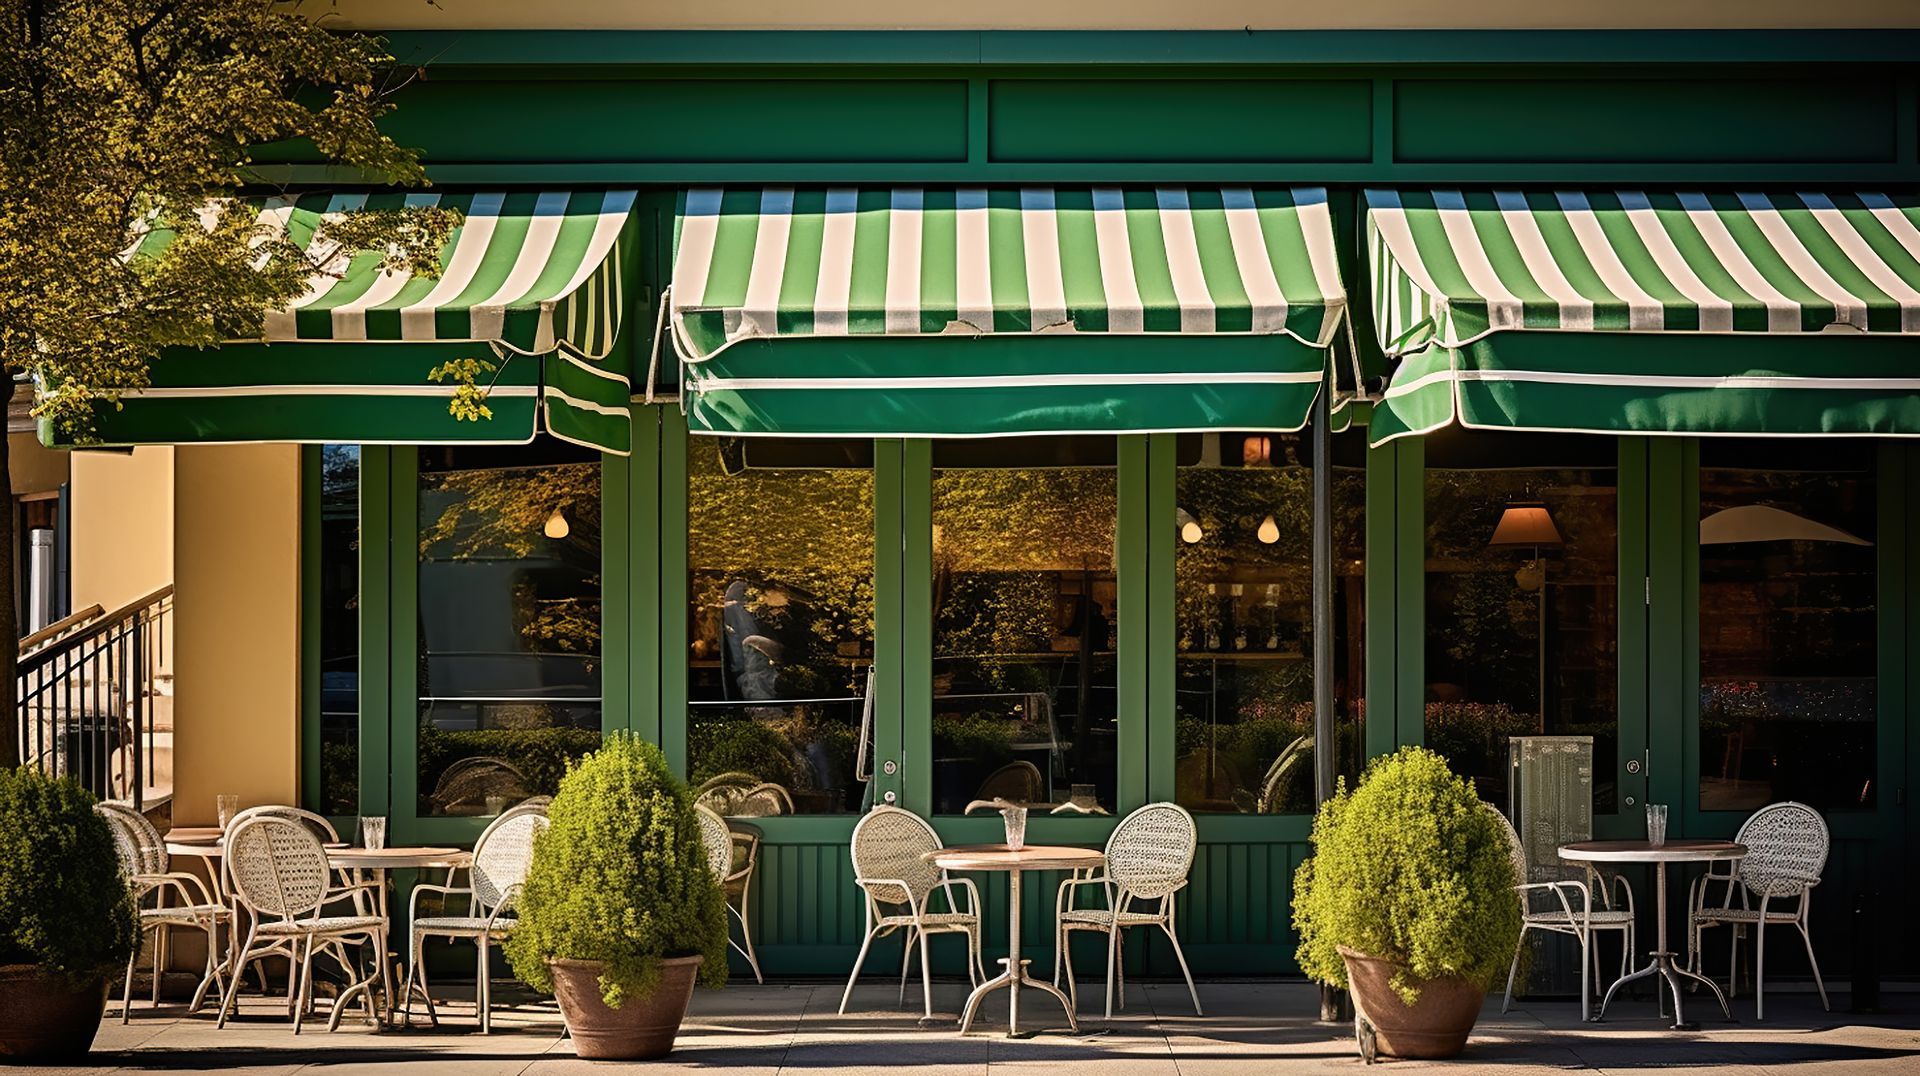 green and white awnings on the outside of a business with bushes and white tables and chairs